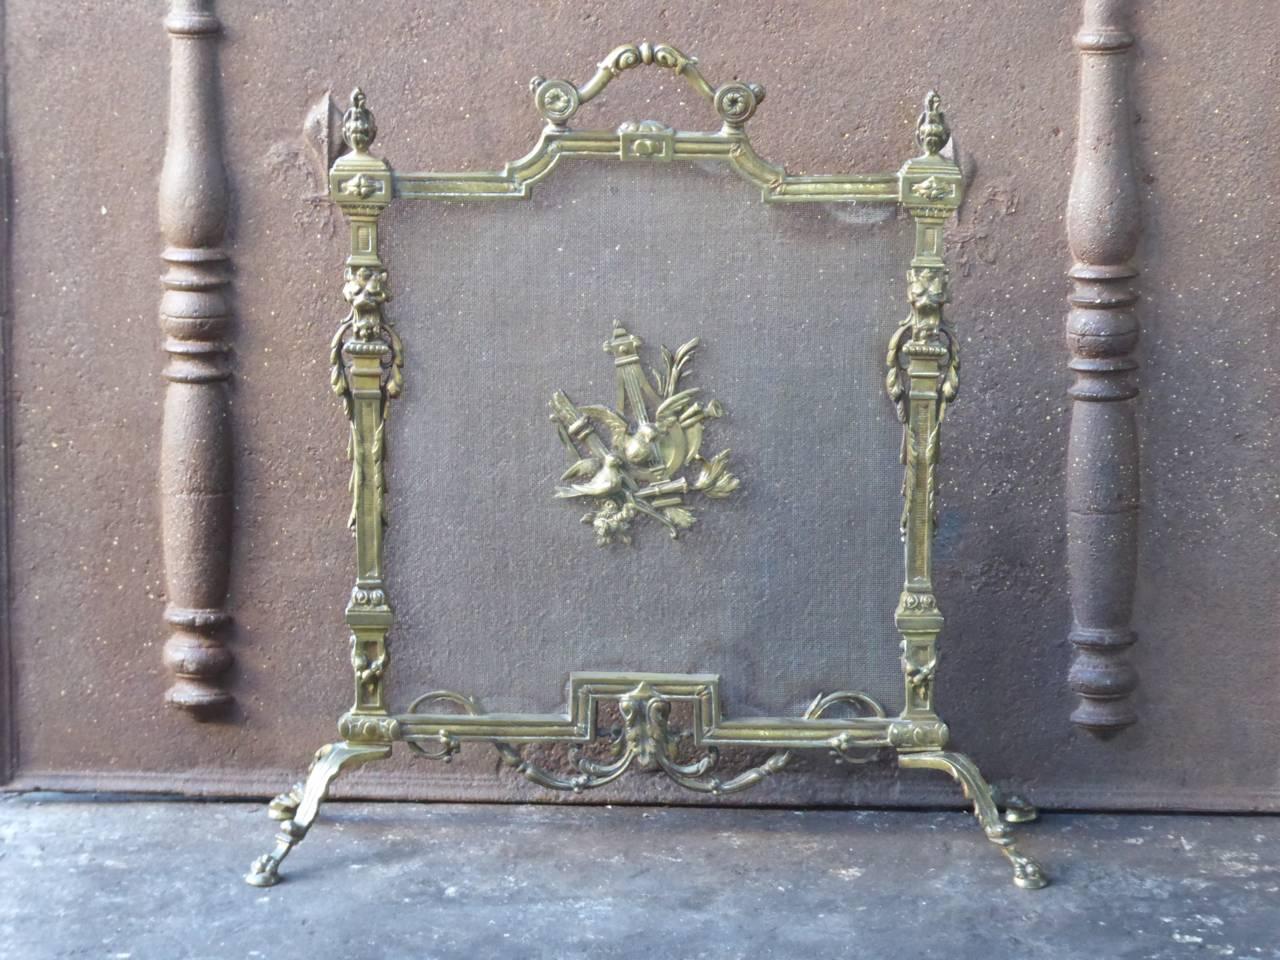 French Art Nouveau fireplace screen made of brass and iron mesh.

We have a unique and specialized collection of antique and used fireplace accessories consisting of more than 1000 listings at 1stdibs. Amongst others, we always have 300+ firebacks,